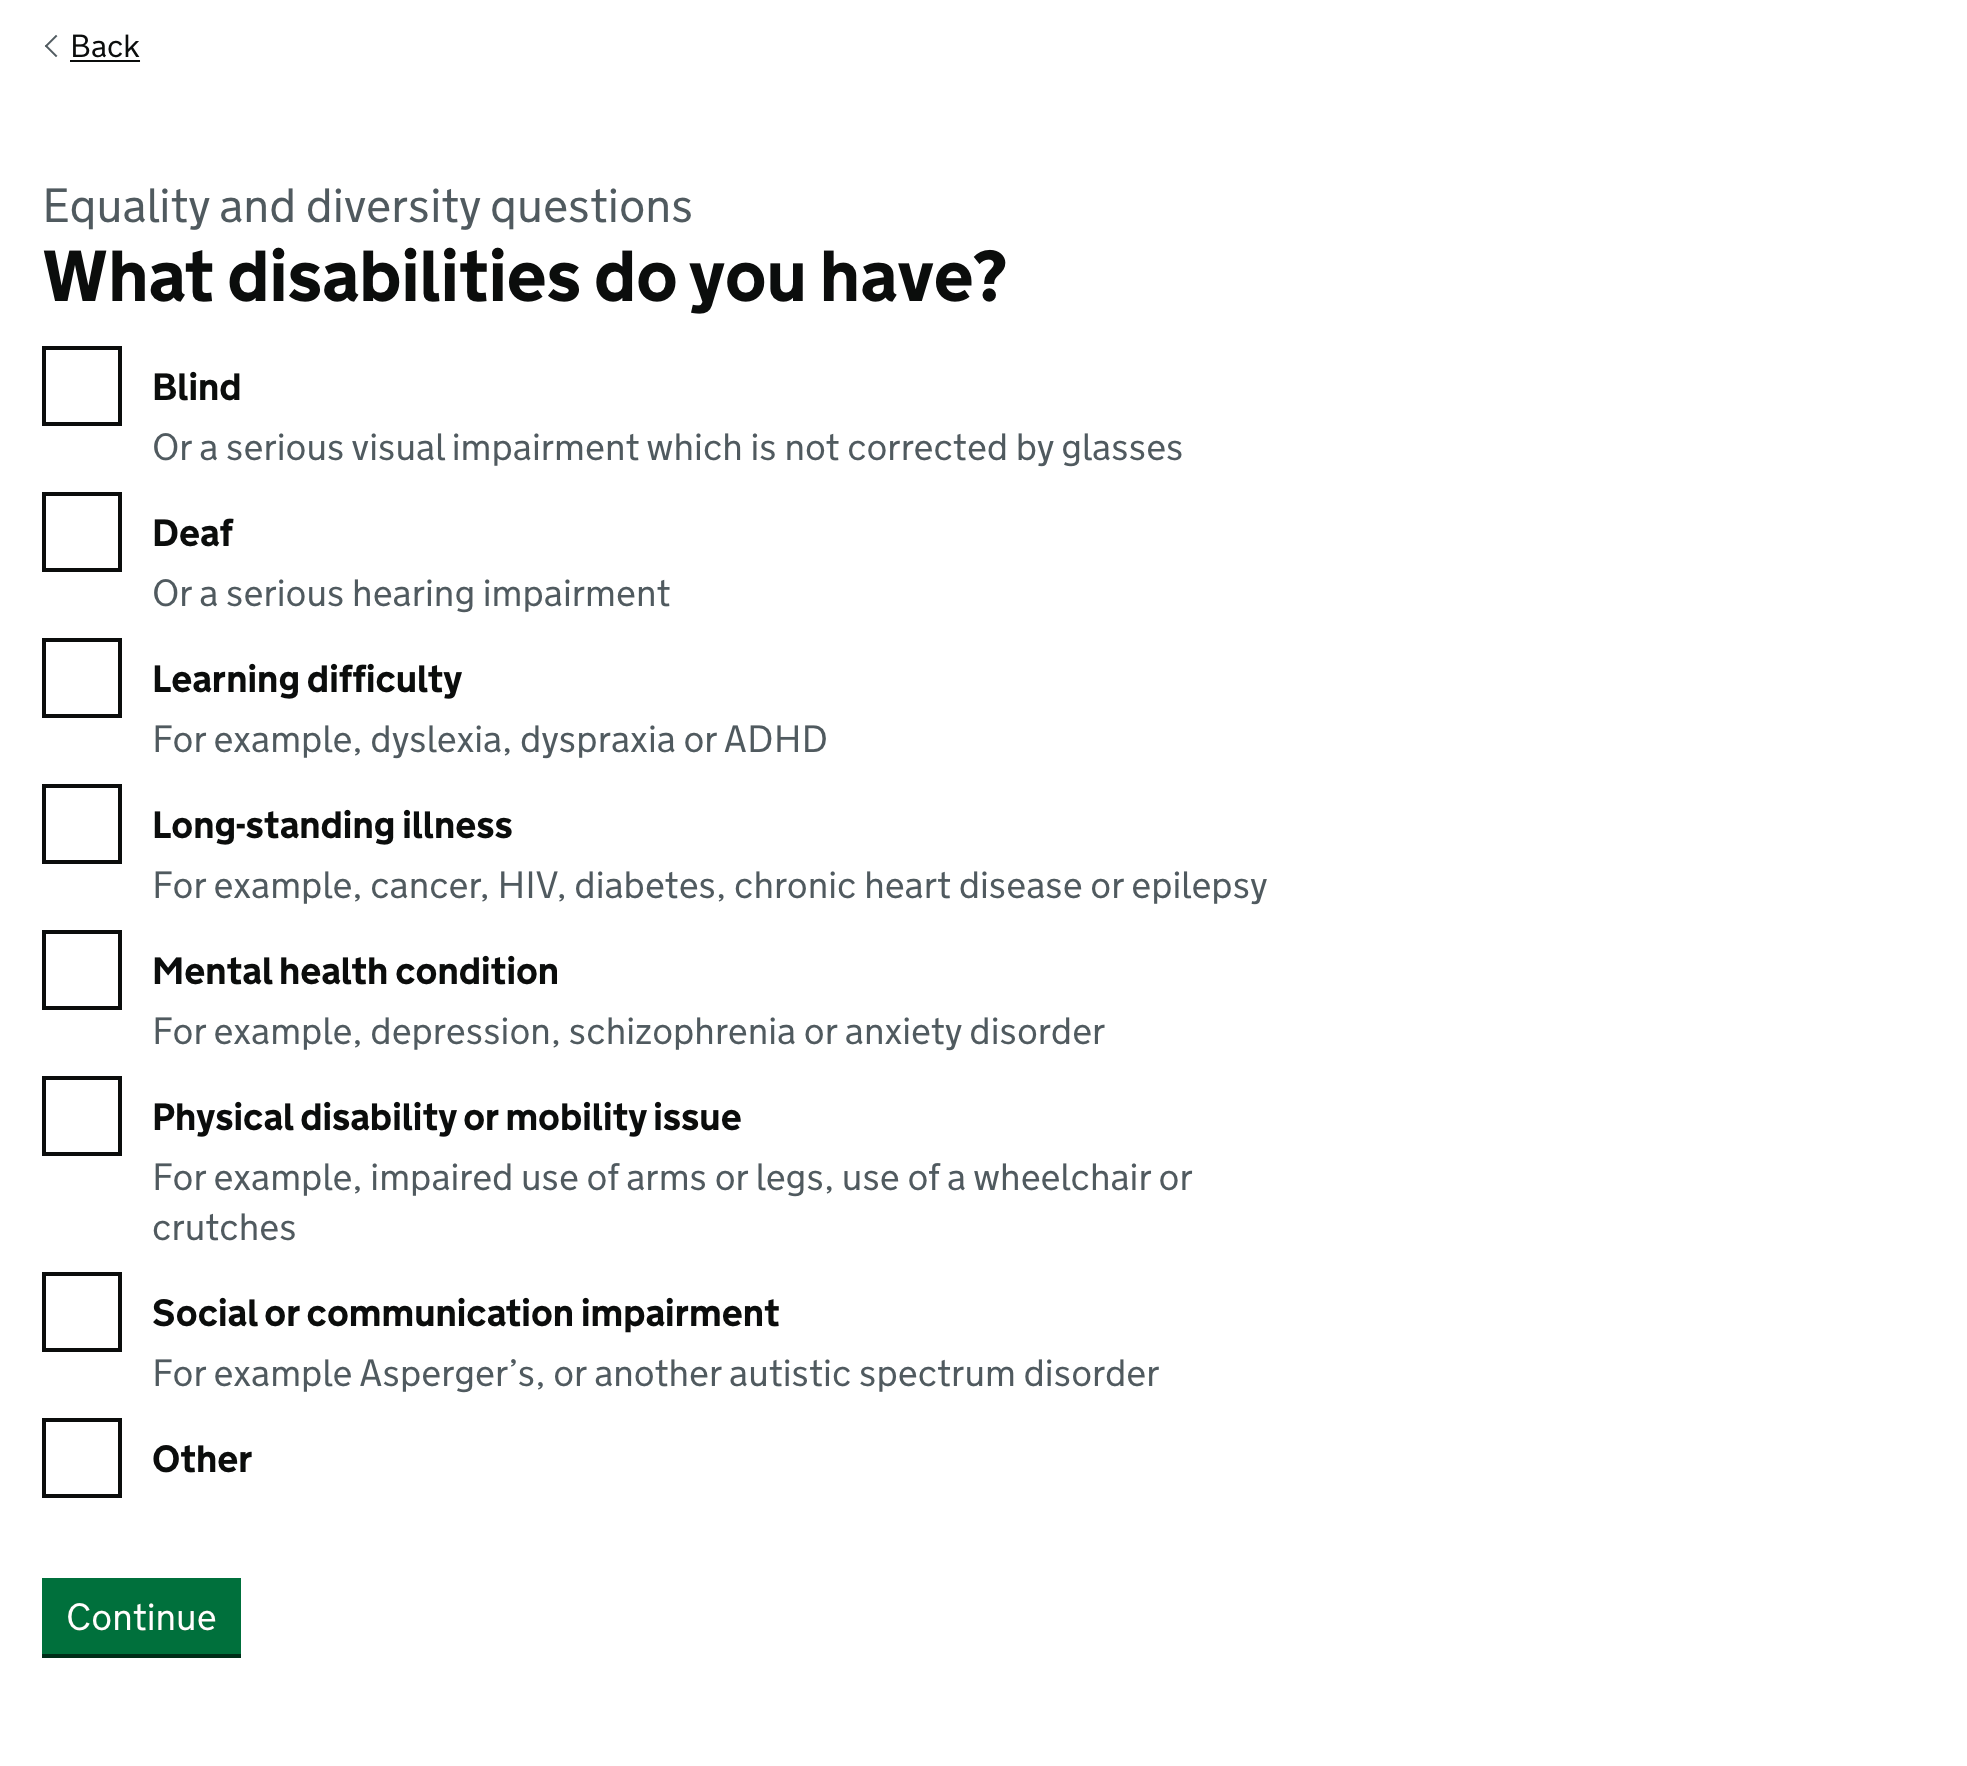 Screenshot showing page with the question ‘What disabilities do you have?’ and this list of options: Blind or a serious visual impairment not corrected by glasses, Dear or a serious hearing impairment, Learning difficulty for example dyslexia, Long-standing illness for example cancer, Mental health condition for example depression, Physical disability or mobility issue for example impaired use of arms or legs, Social or communication impairment for example Asperger’s and Other.